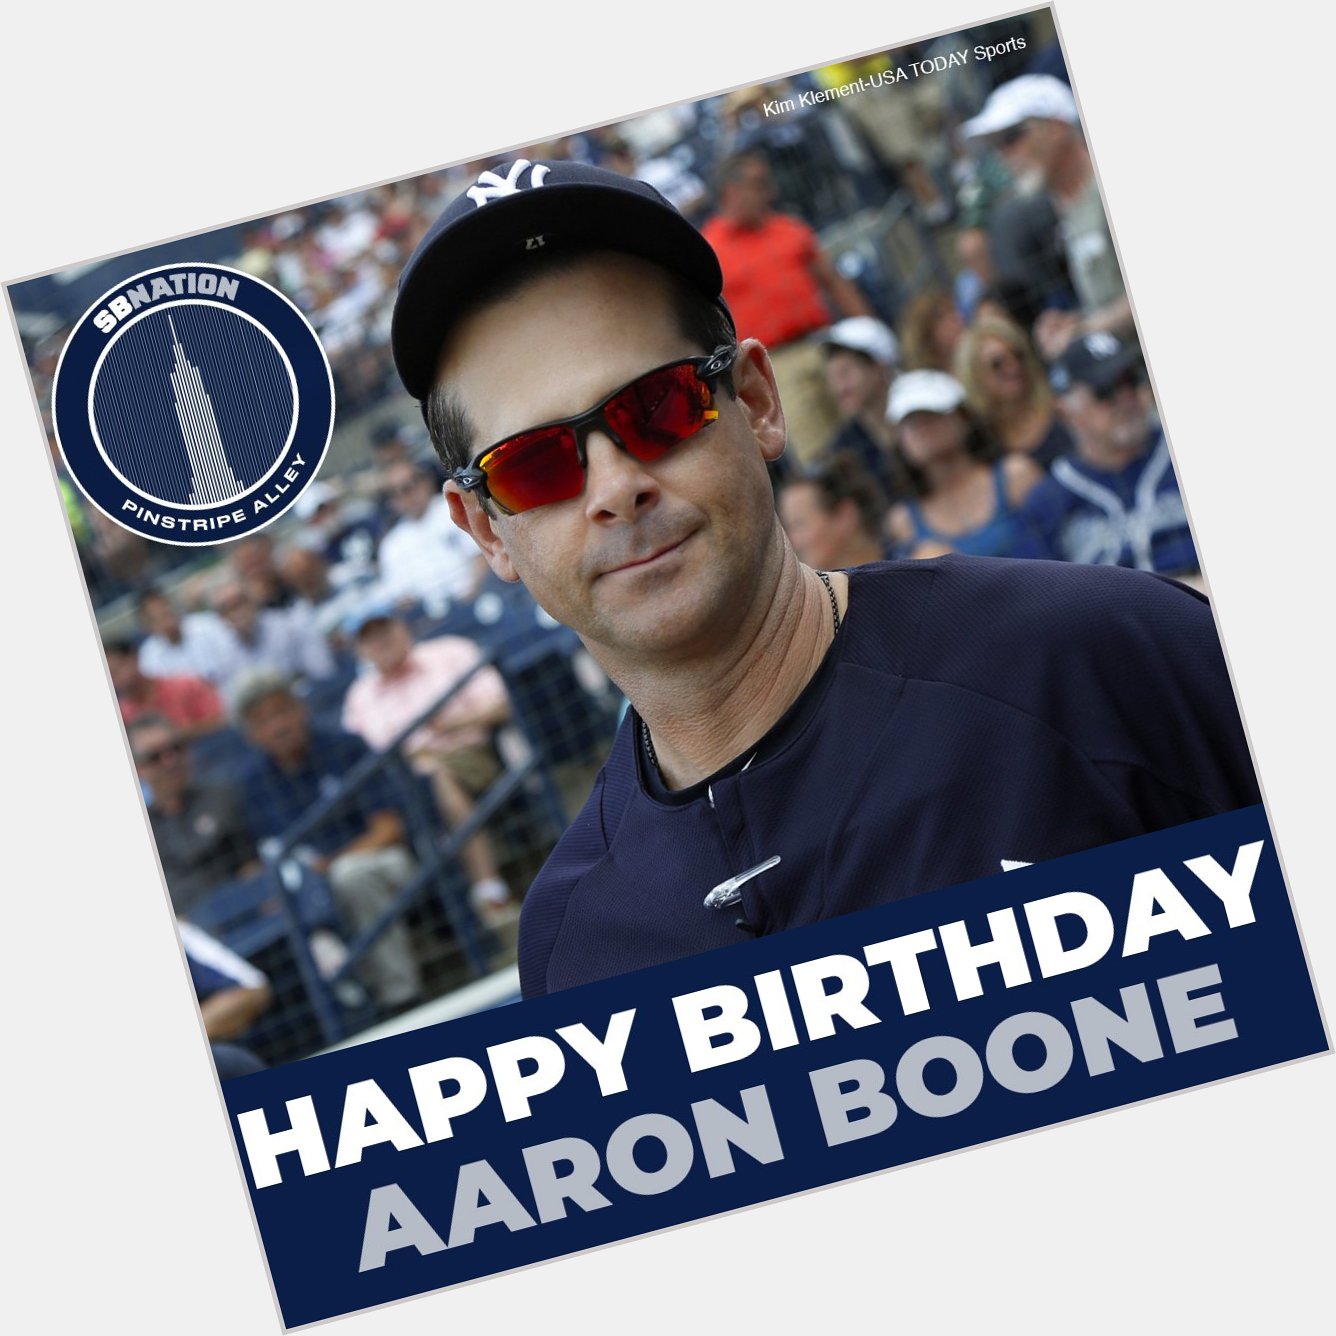 Happy birthday to manager Aaron Boone! 